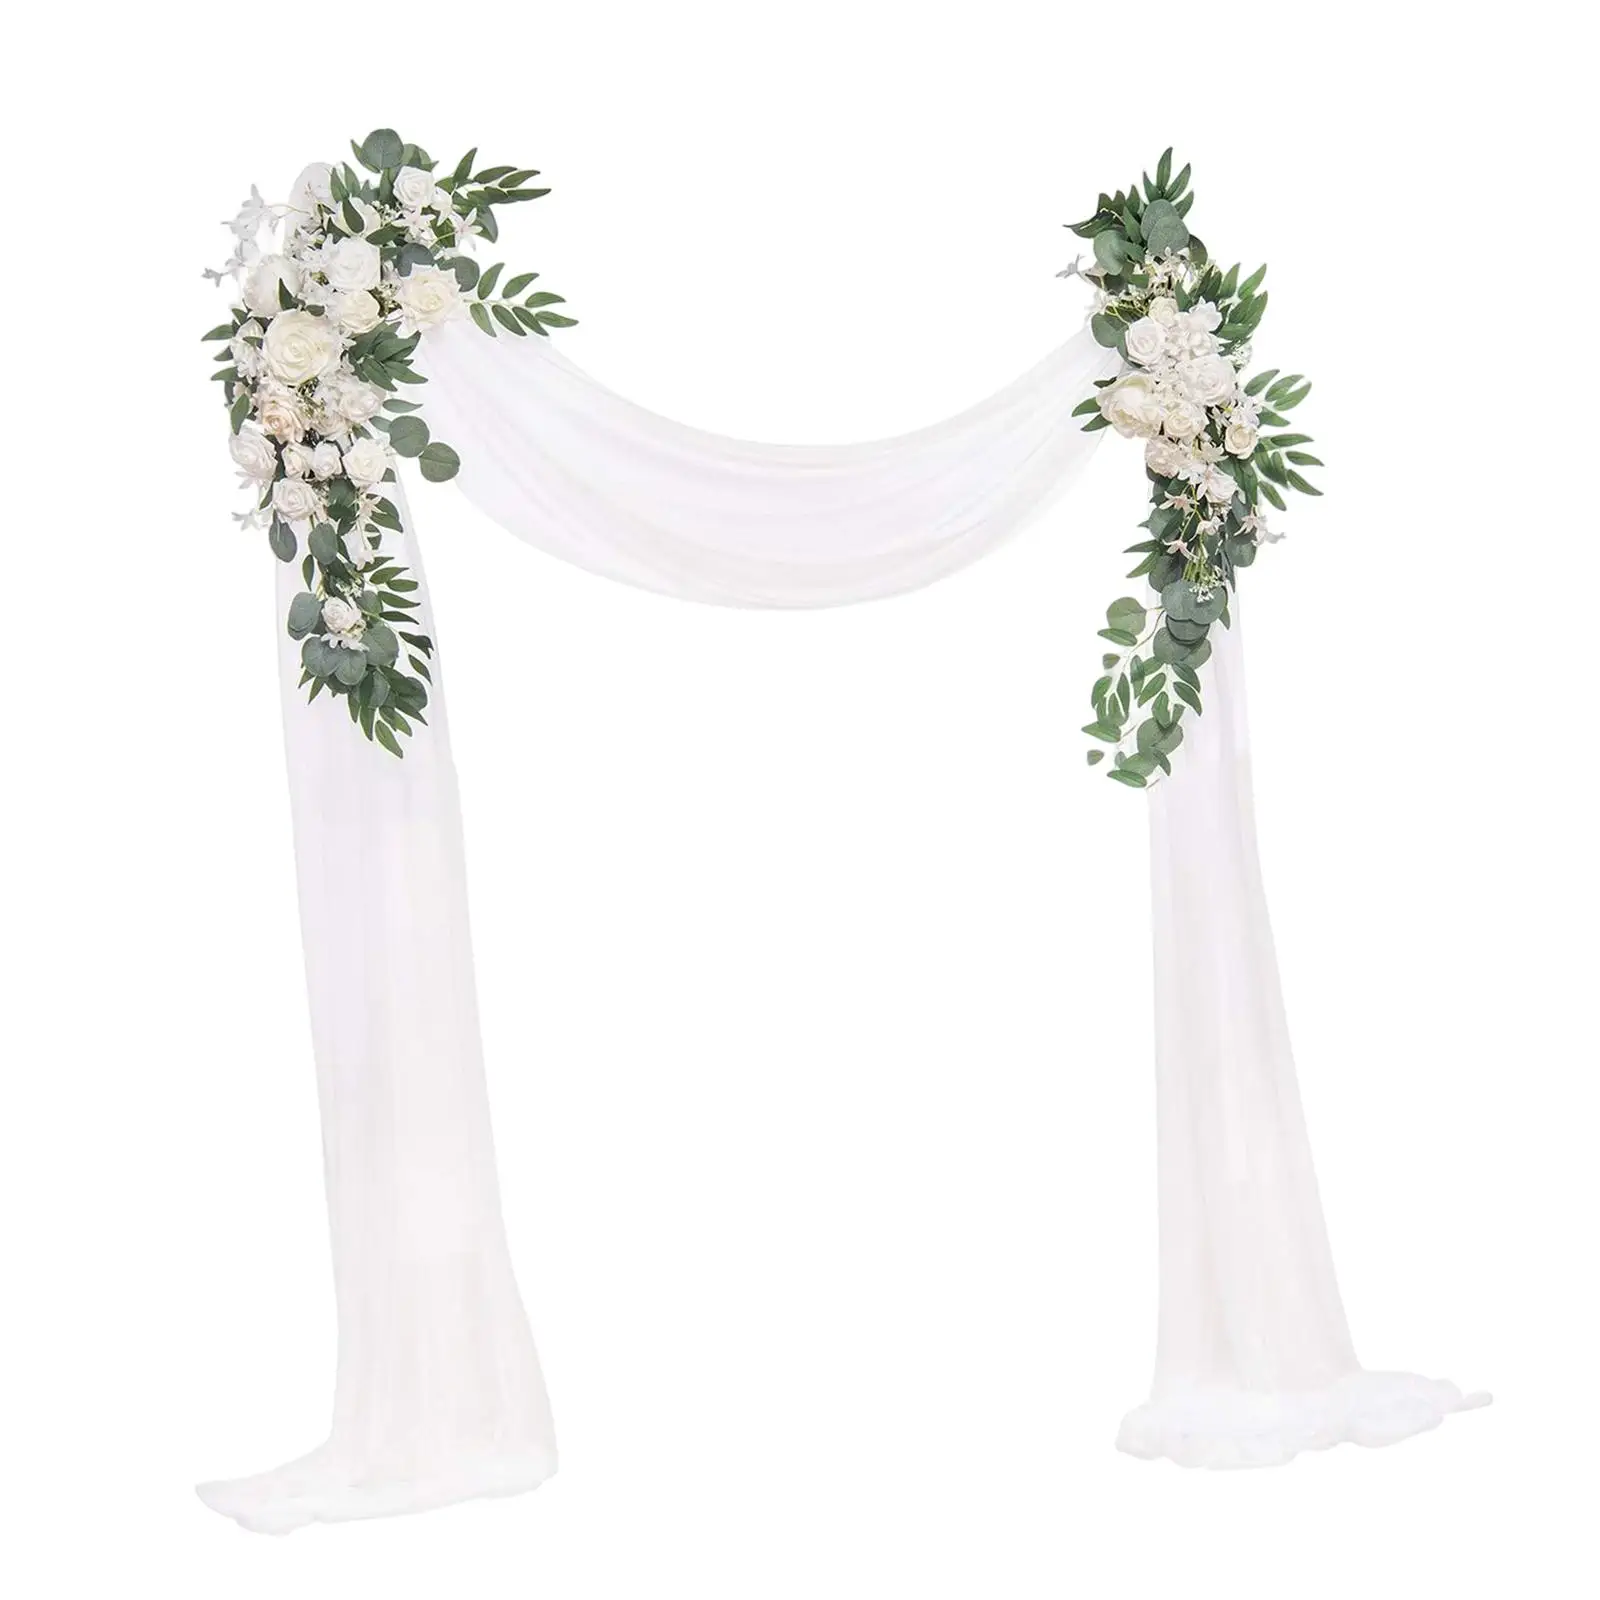 Artificial Wedding Arch Flowers Kit, Centerpiece Garland Artificial Flower Swag for Wall